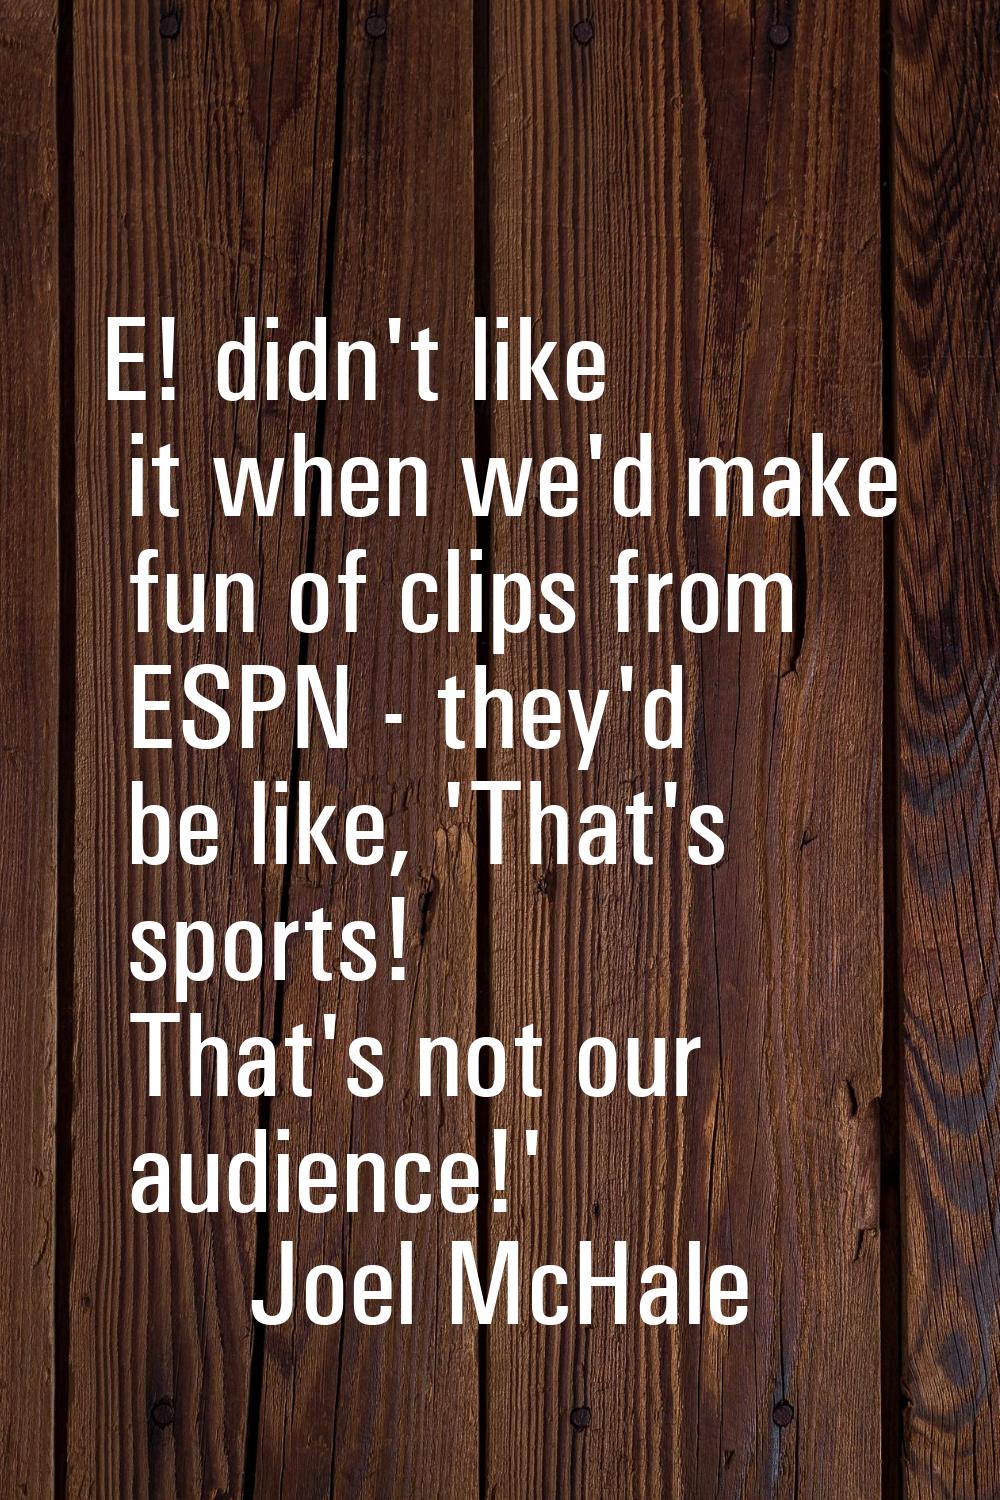 E! didn't like it when we'd make fun of clips from ESPN - they'd be like, 'That's sports! That's no